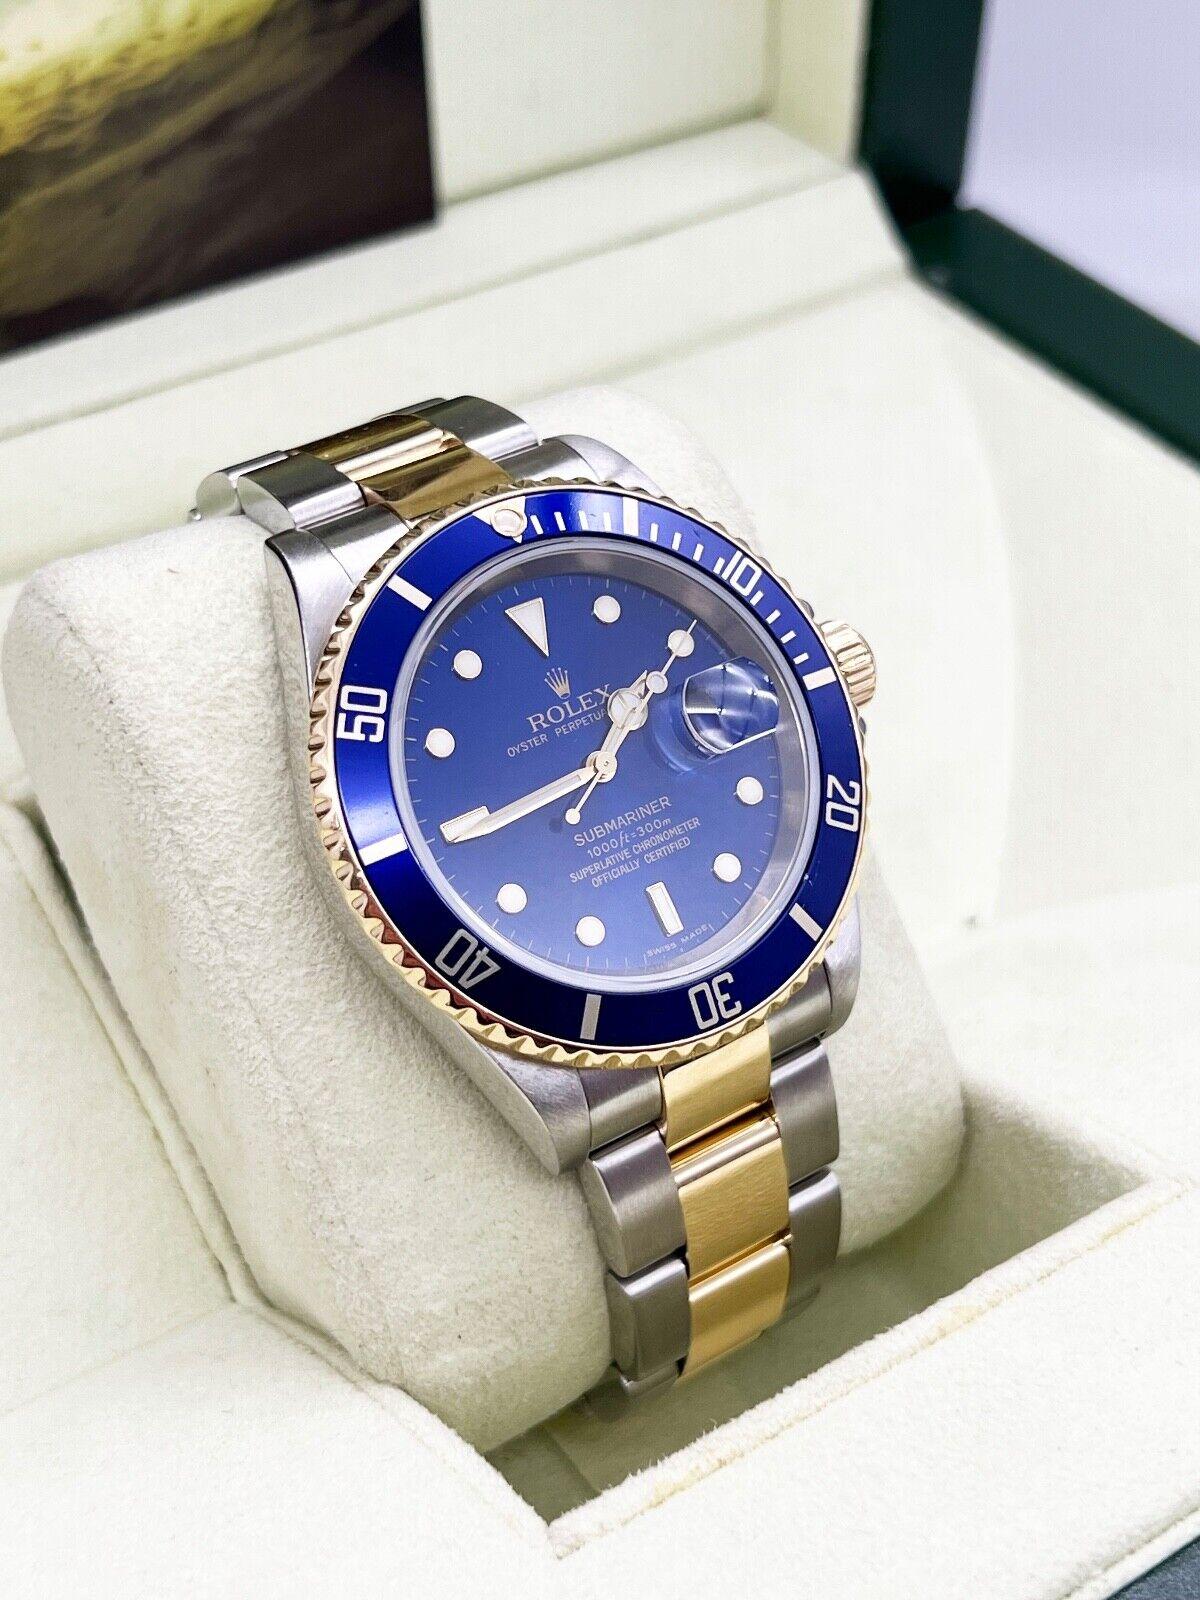 
Style Number: 16613



Serial: Z616***



Year: 2007

 

Model: Submariner

 

Case Material: Stainless Steel 

  

Band: 18K Yellow Gold & Stainless Steel 

  

Bezel: Blue

 

Dial: Blue

 

Face: Sapphire Crystal

 

Case Size: 40mm

